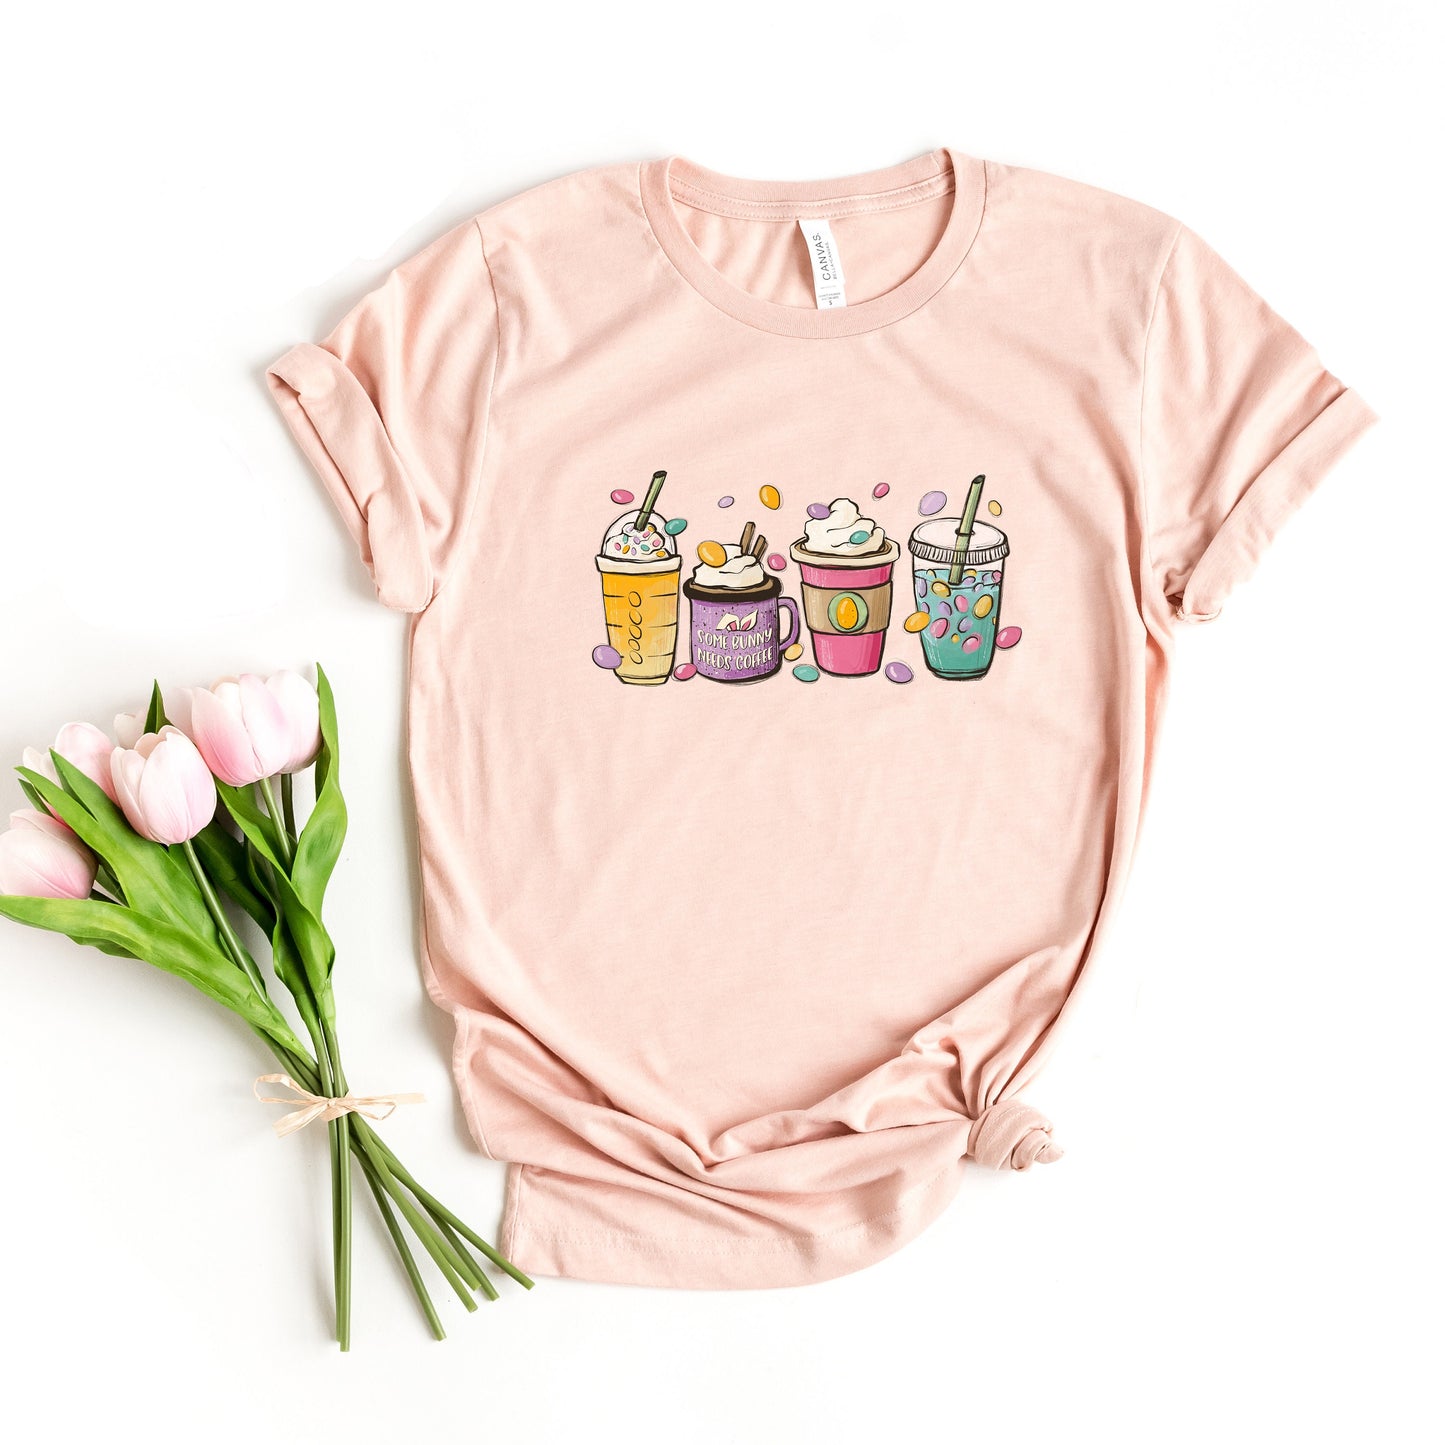 Easter Coffee Graphic T-Shirt, Coffee Lover, Coffee Addict, Latte Shirt, Frap Shirt, Some Bunny Needs Coffee, Funny Spring Shirt